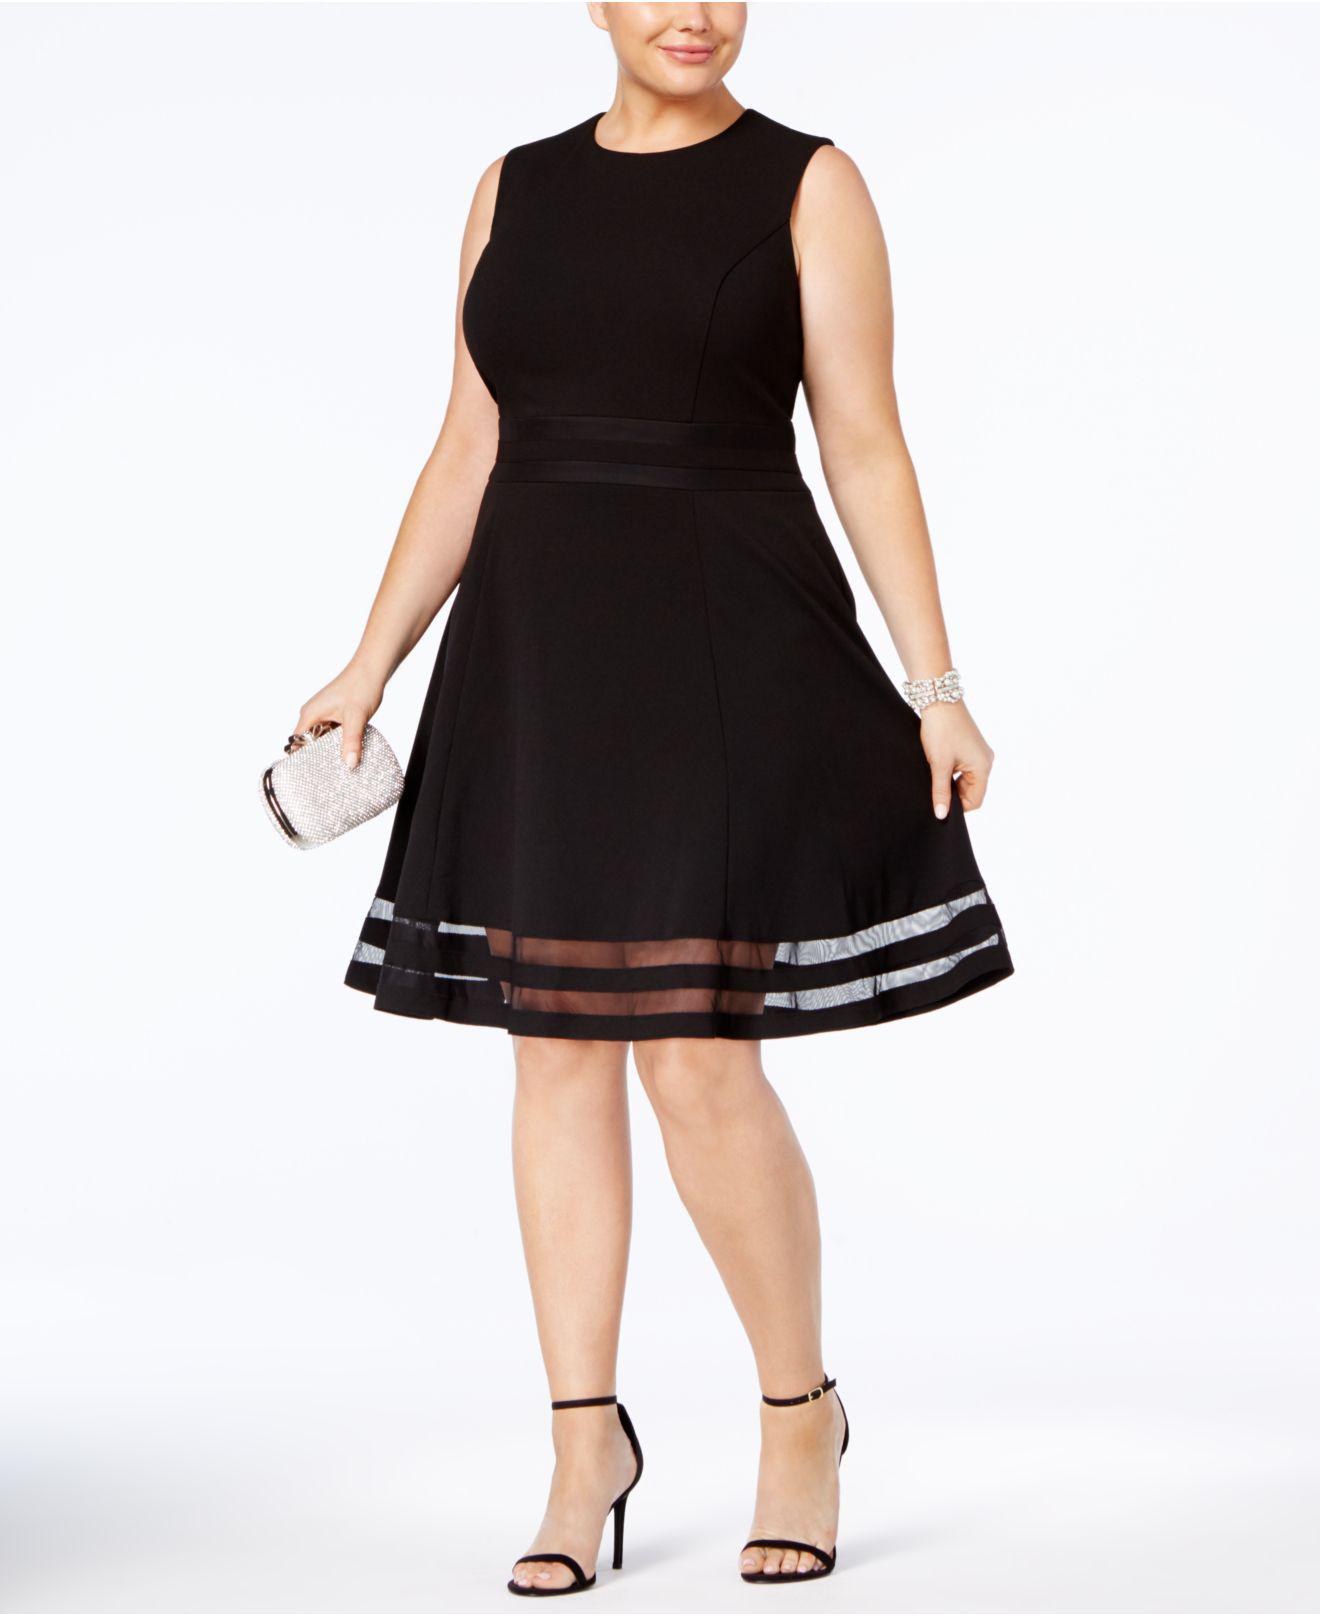 calvin klein fit and flare black dress